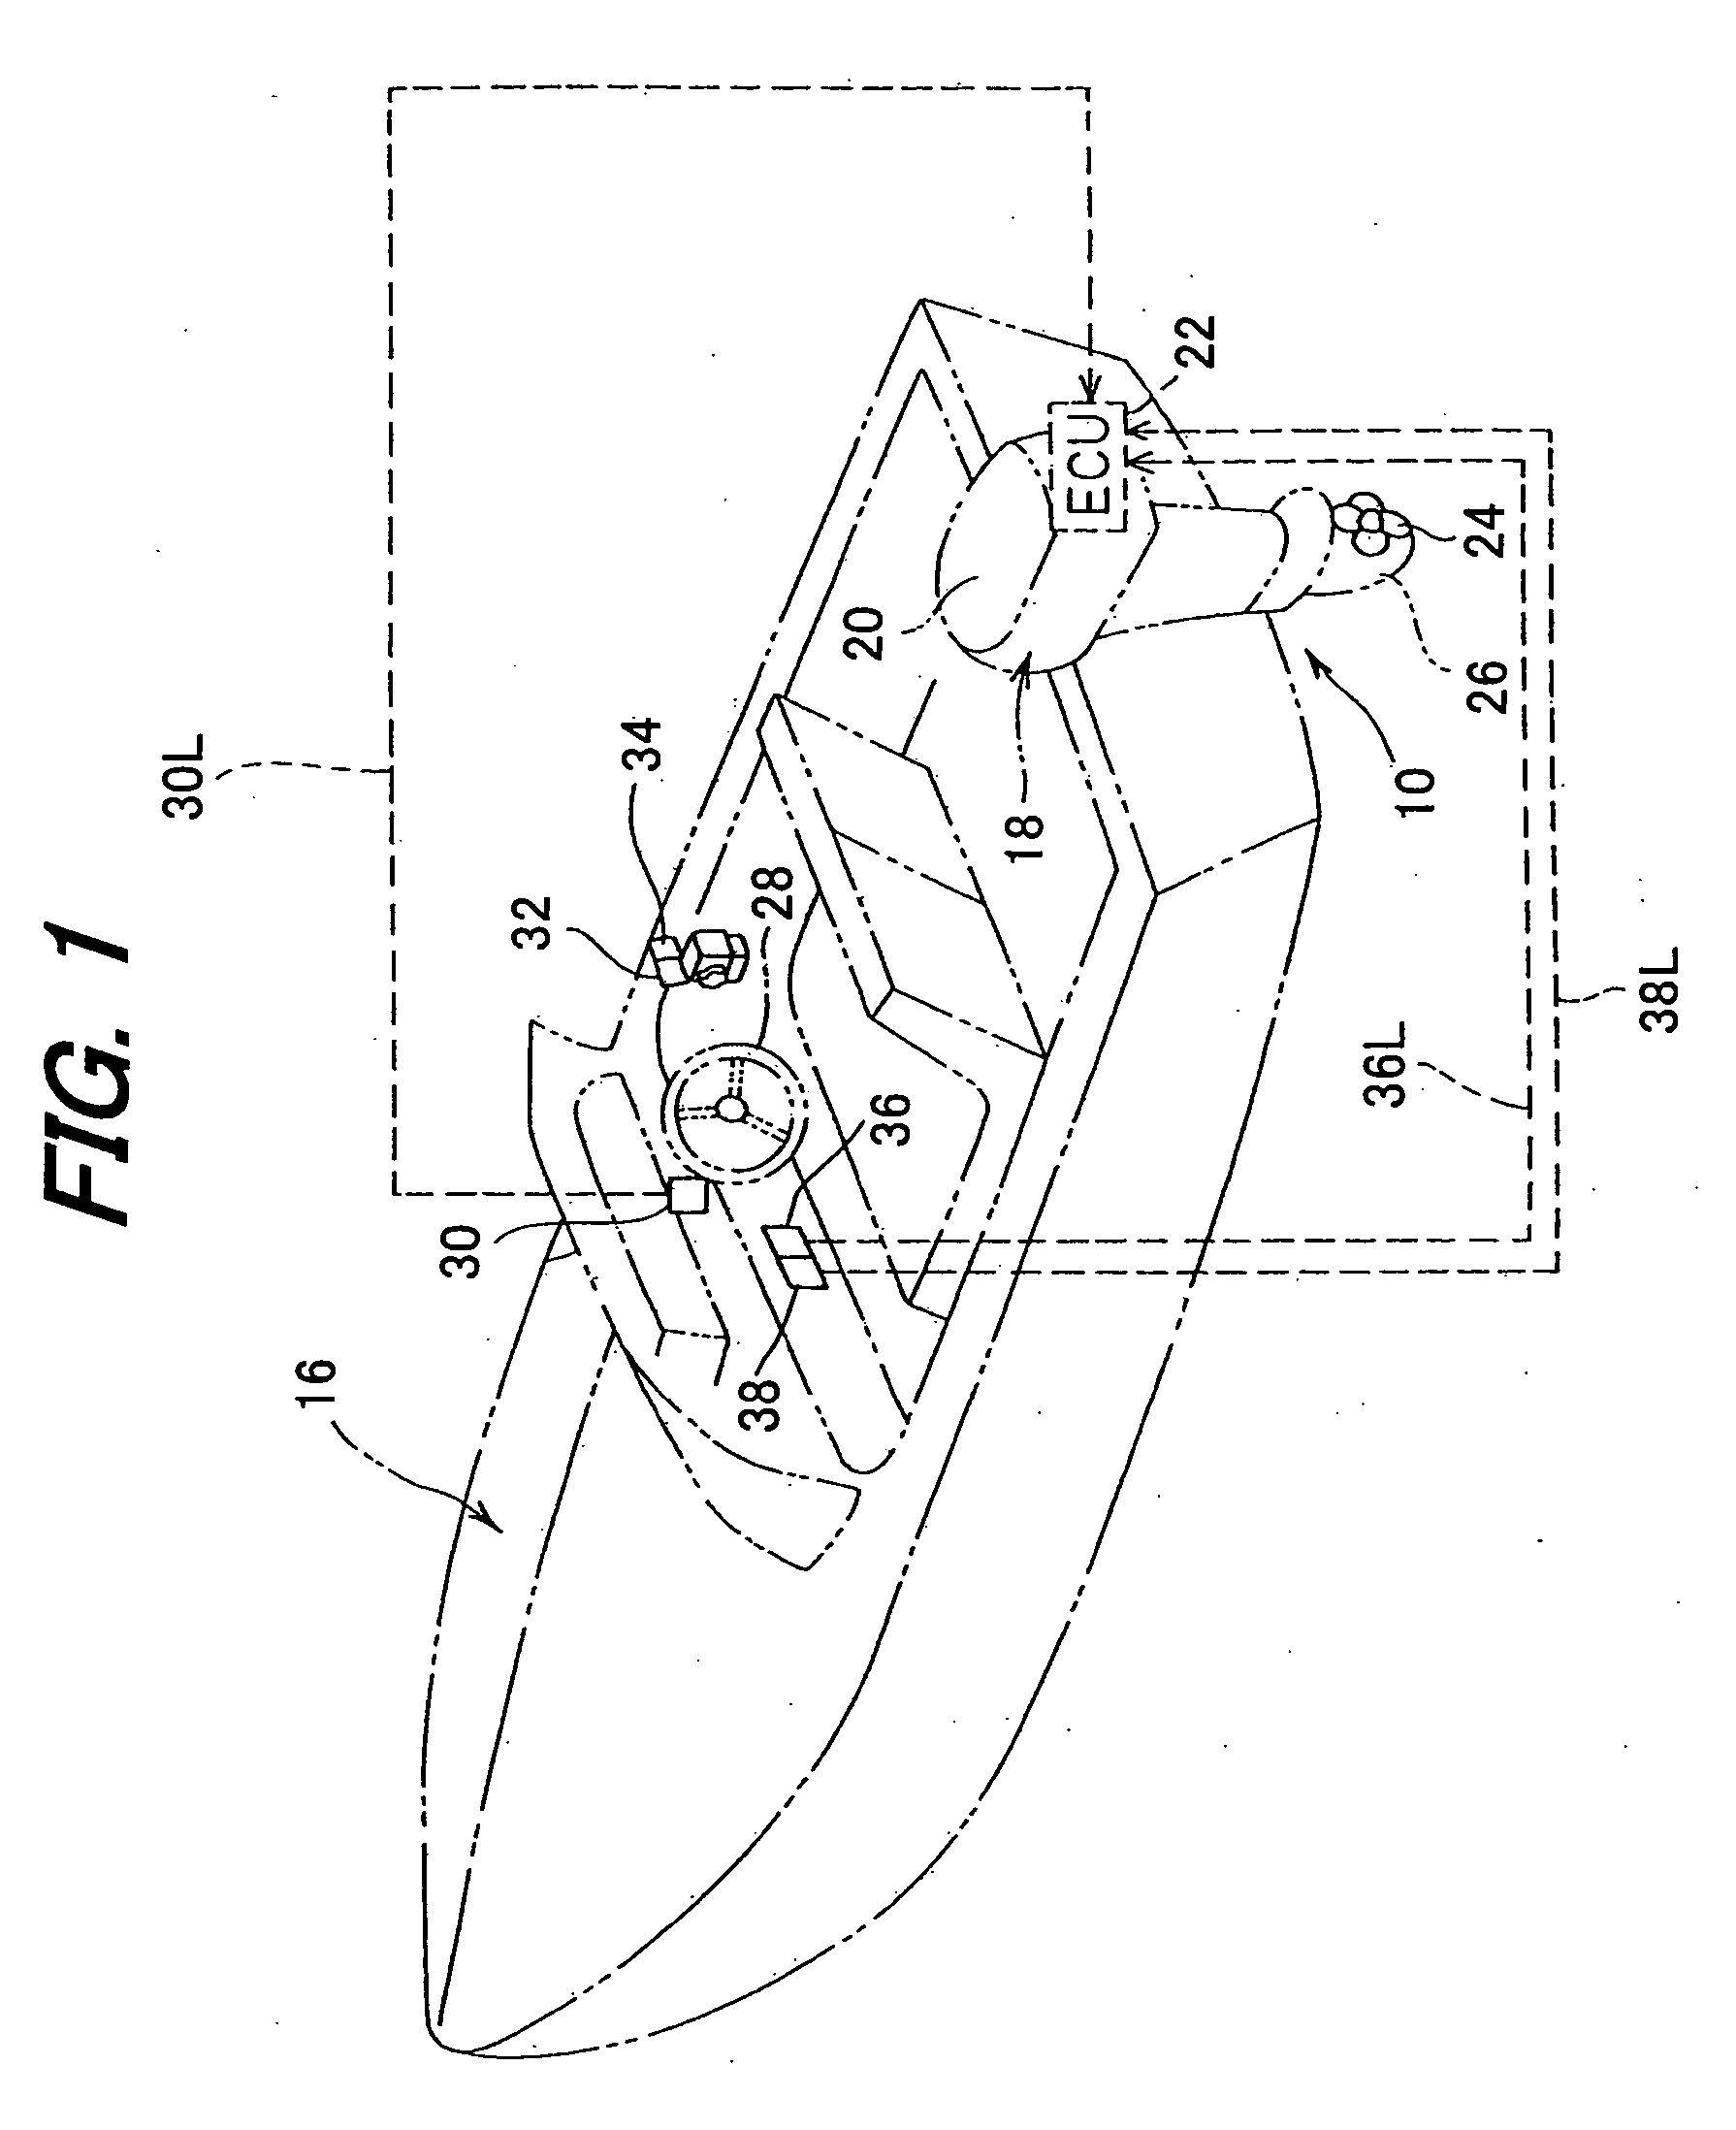 Outboard motor steering control system